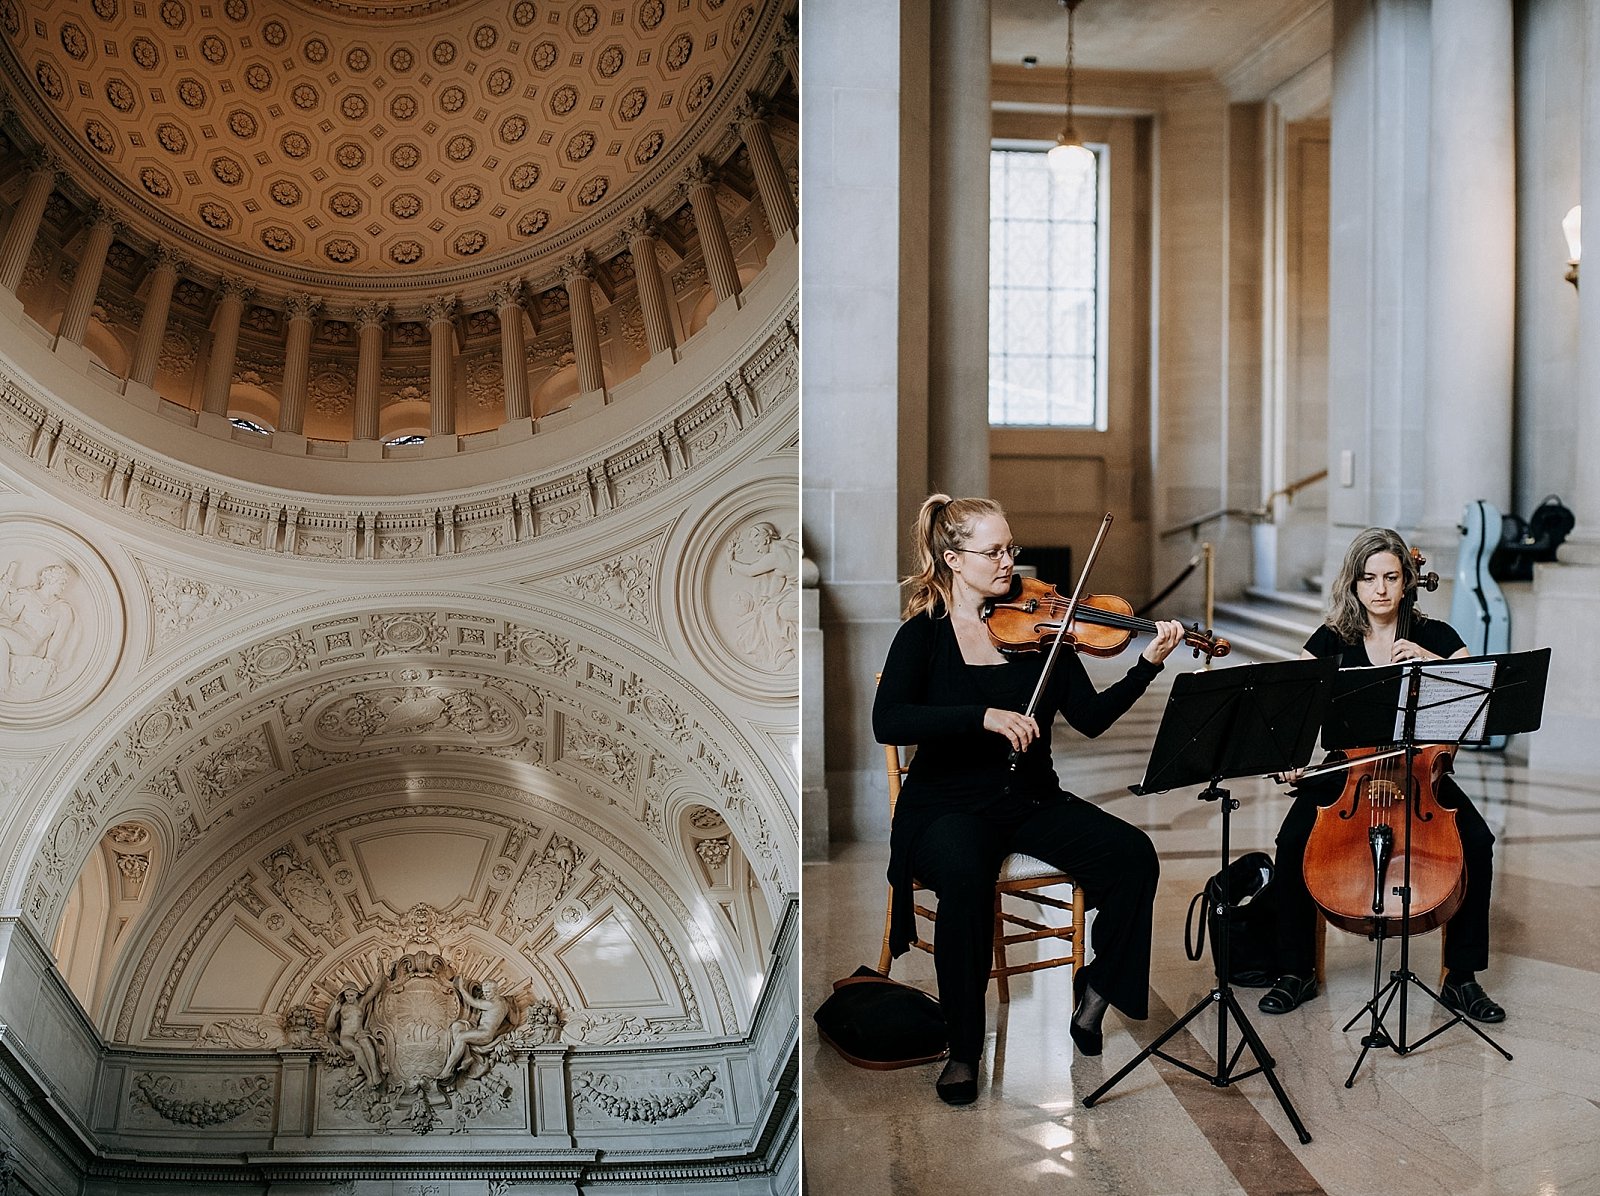  grand architecture of city hall and two musicians playing violin and cello   